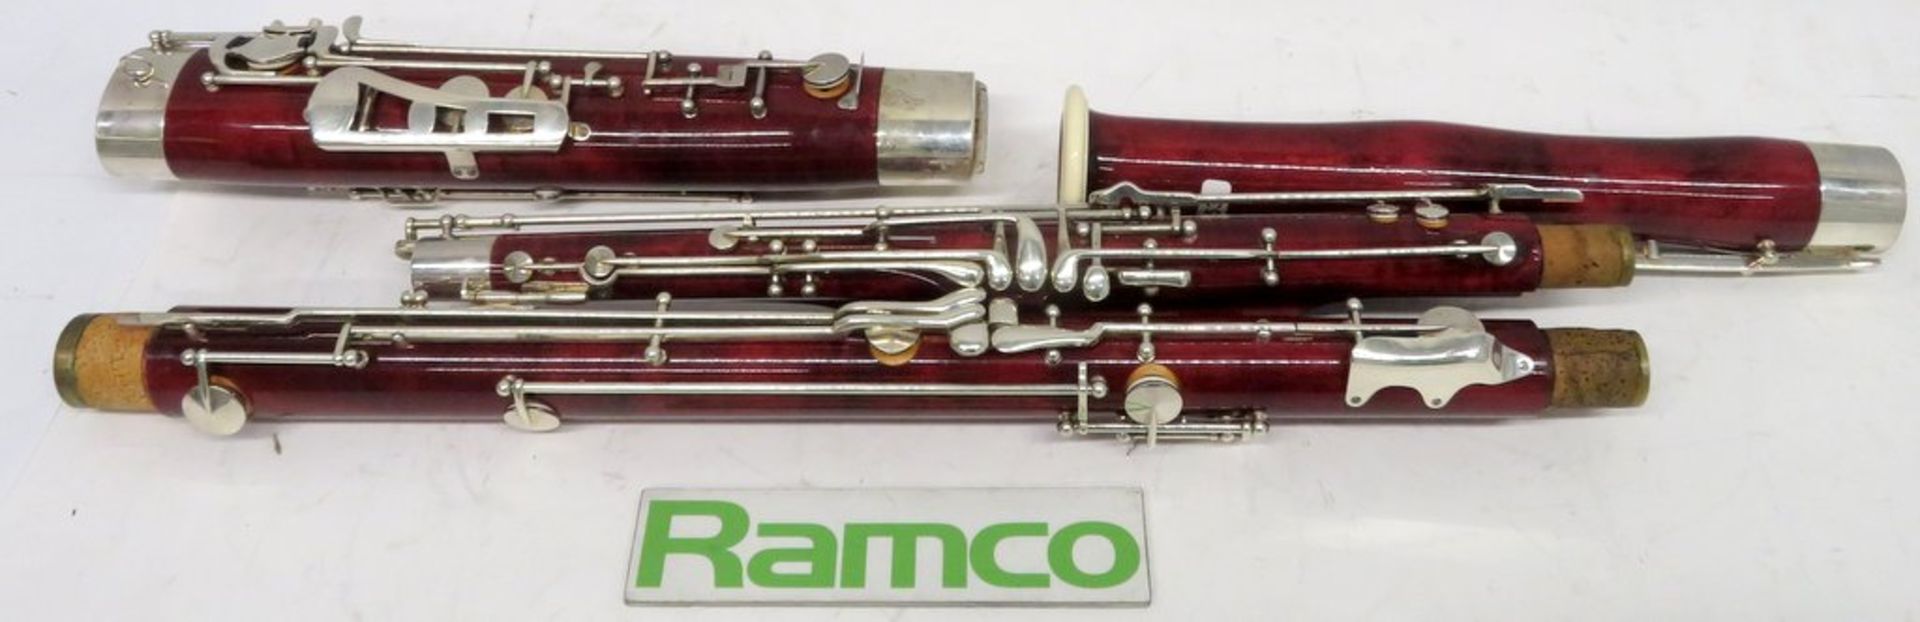 W.Schreiber S71 Bassoon With Case. Serial Number: 36306. No Crooks Included. Please Note That This - Image 3 of 17